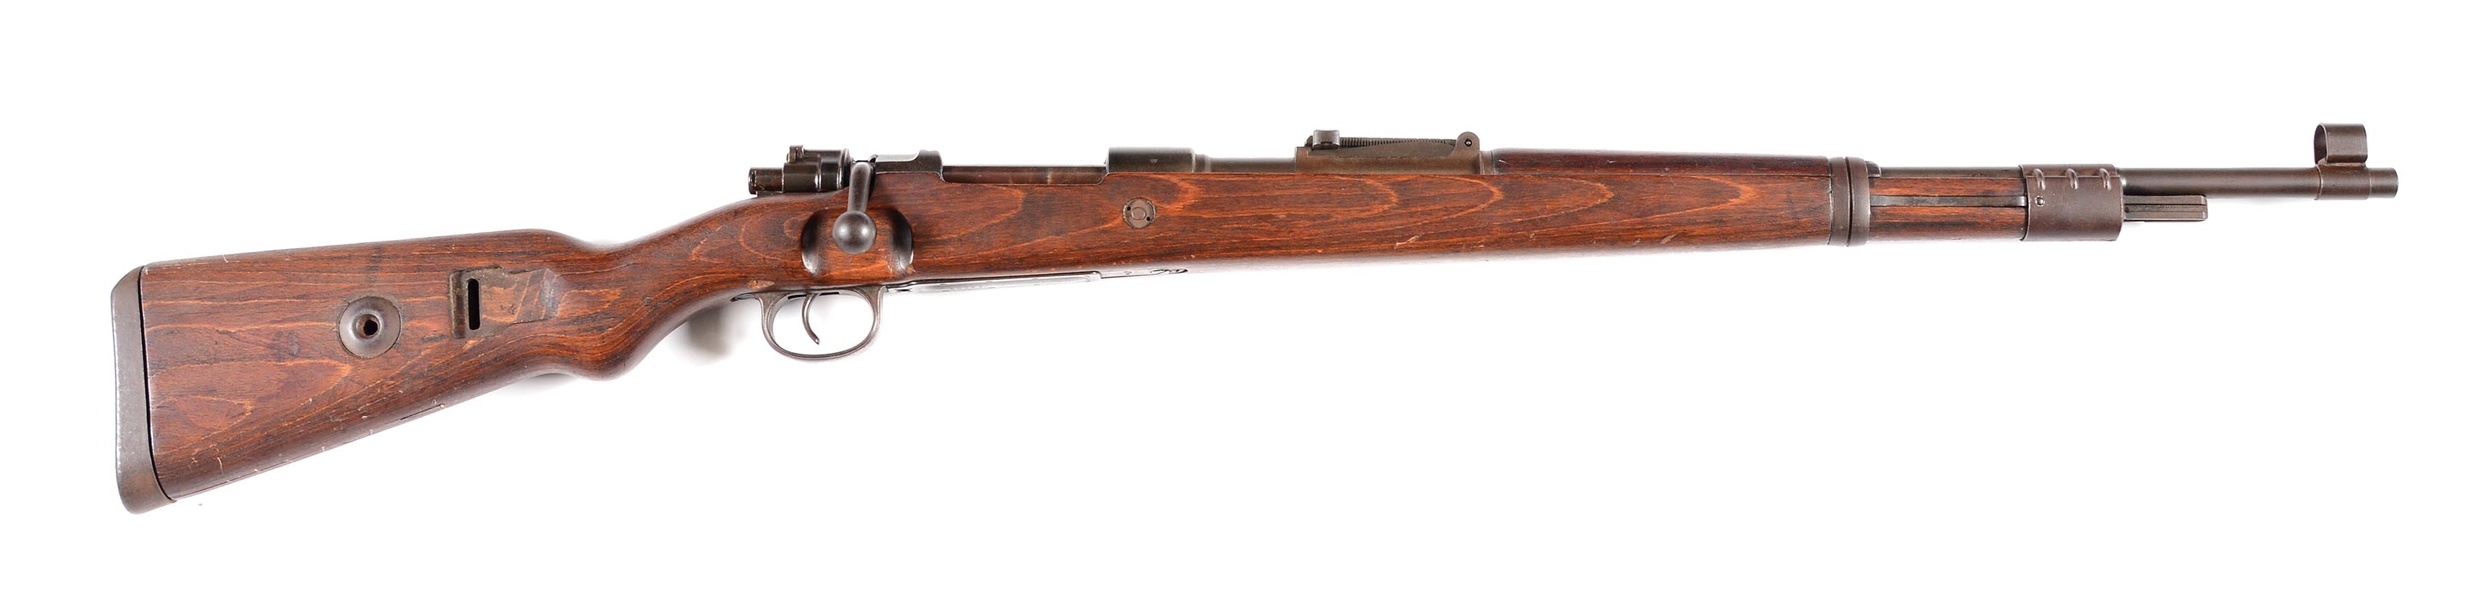 (C) MAUSER K98 BOLT ACTION RIFLE WITH ALL MATCHING NUMBERS.